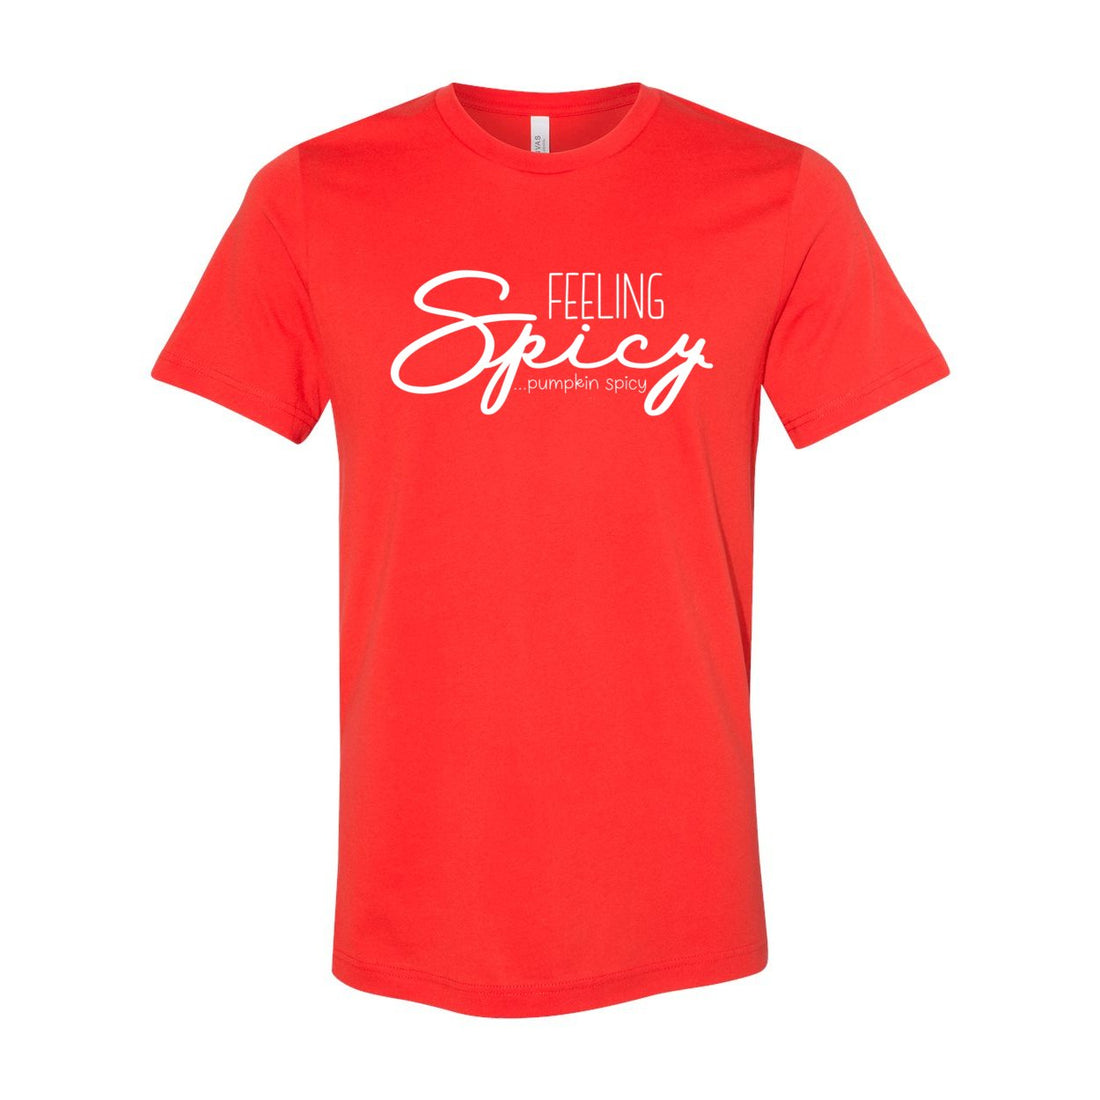 Feeling Spicy - T-Shirts - Positively Sassy - Feeling Spicy